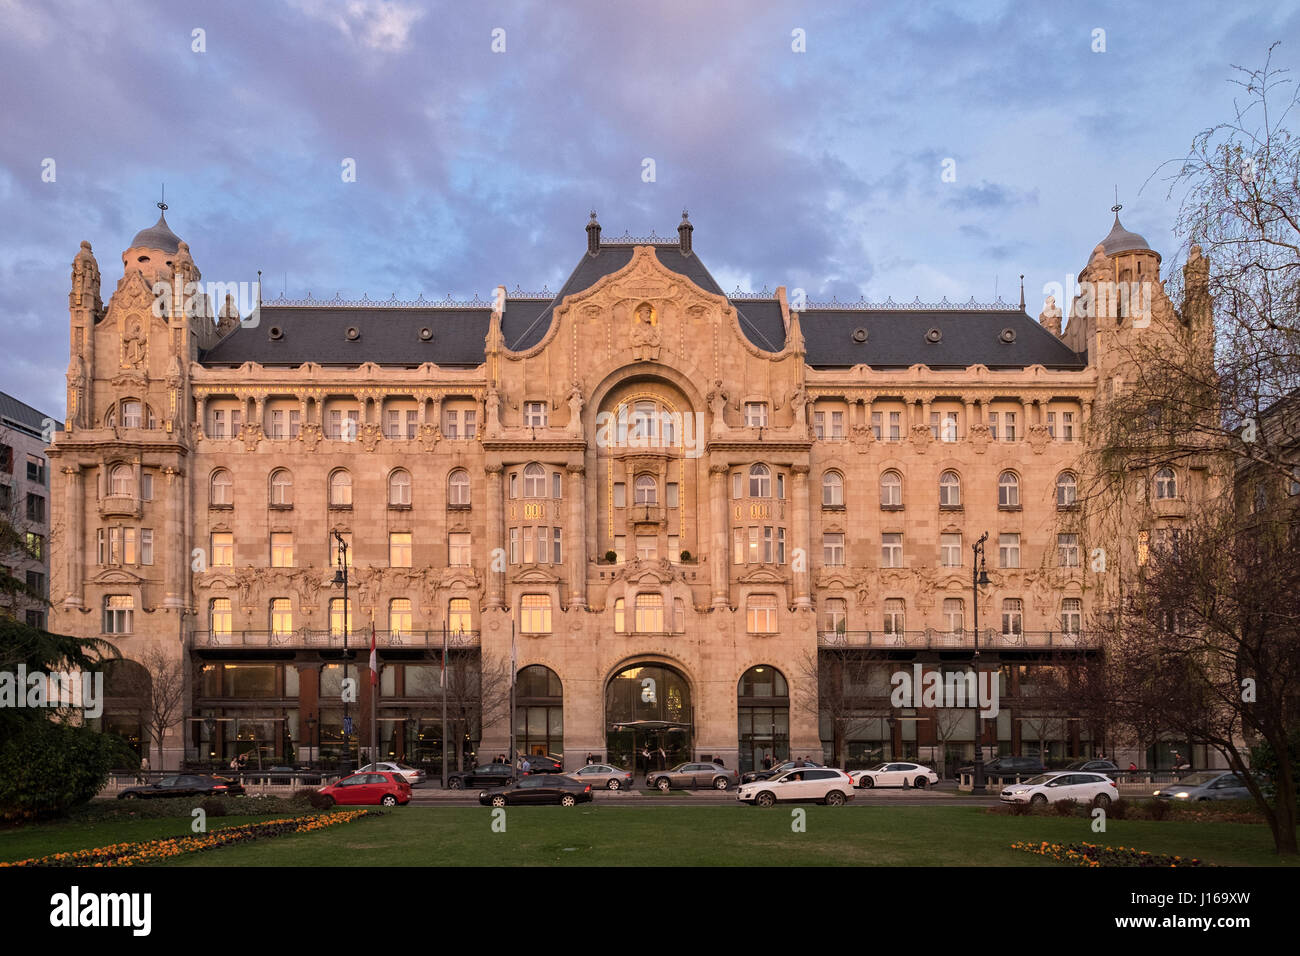 The Gresham Palace is a building in Budapest, Hungary. It is an example of Art Nouveau architecture. Stock Photo